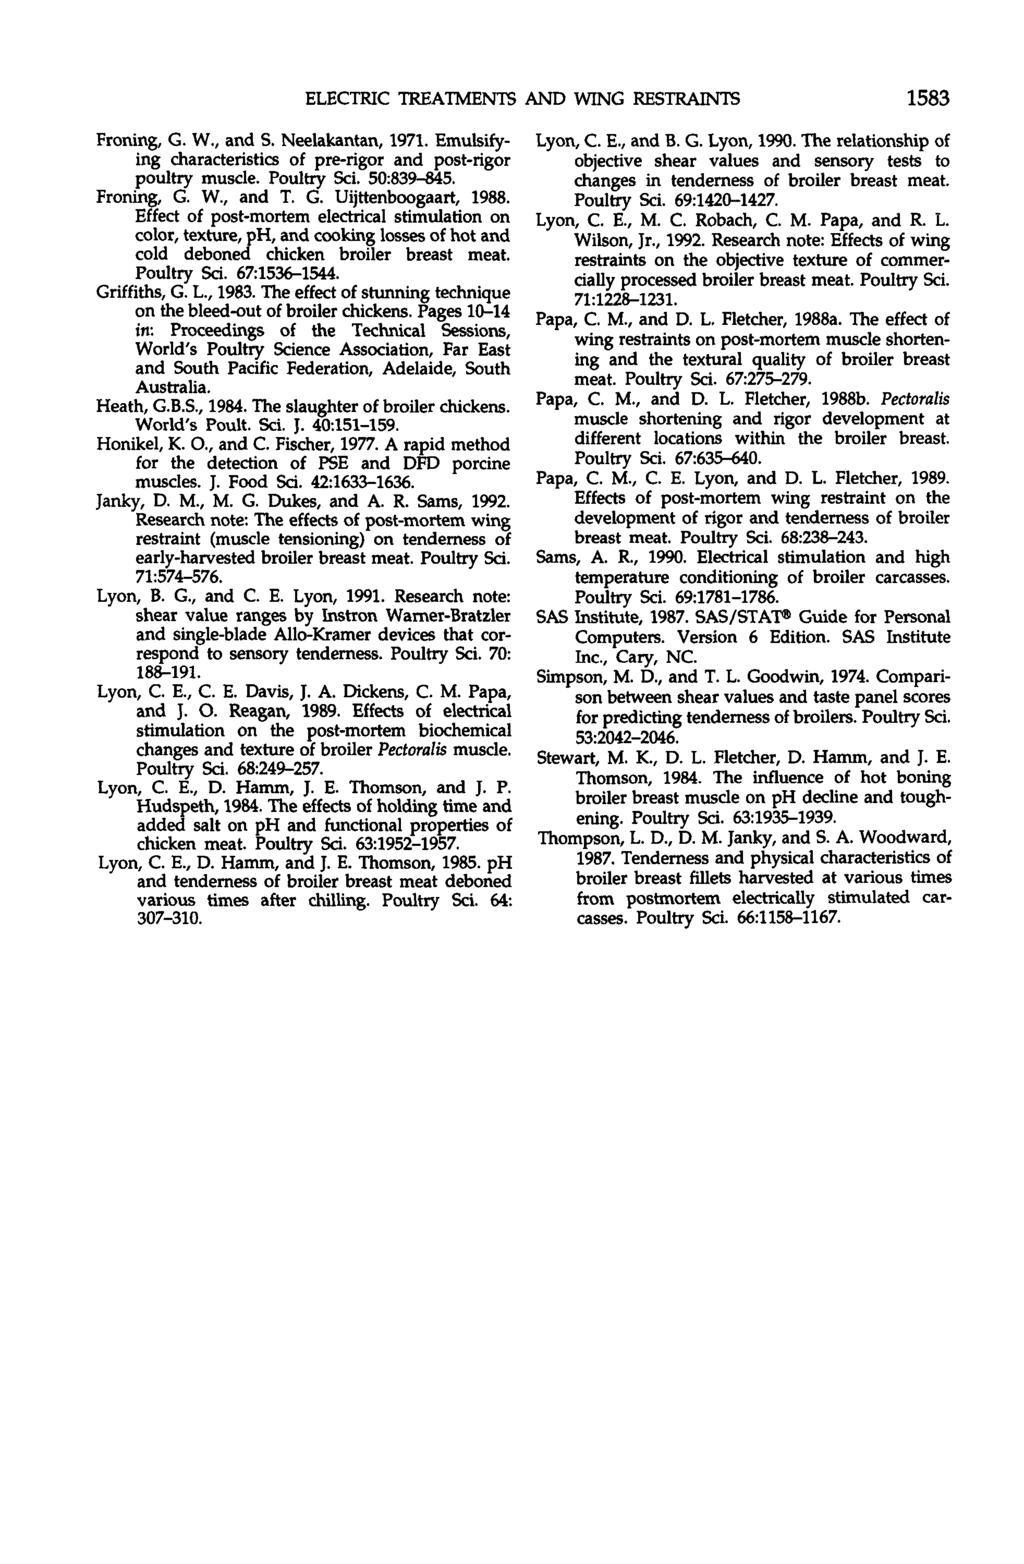 ELECTRIC TREATMENTS AND WING RESTRAINTS 1583 Froning, G. W., and S. Neelakantan, 1971. Emulsifying characteristics of pre-rigor and post-rigor poultry muscle. Poultry Sci. 50:839-845. Froning, G. W., and T.